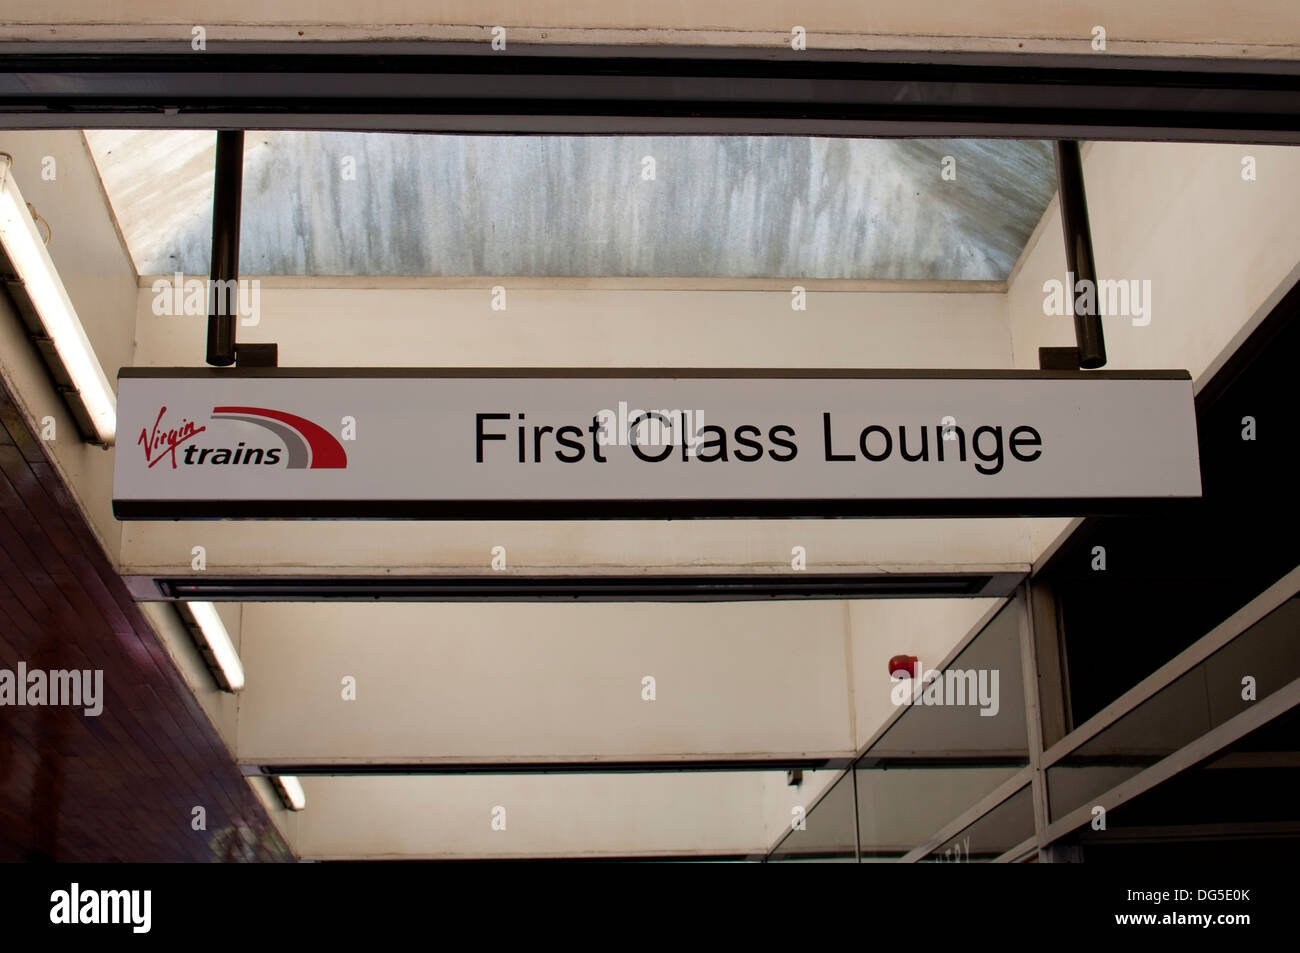 Virgin Trains First Class Lounge sign Stock Photo